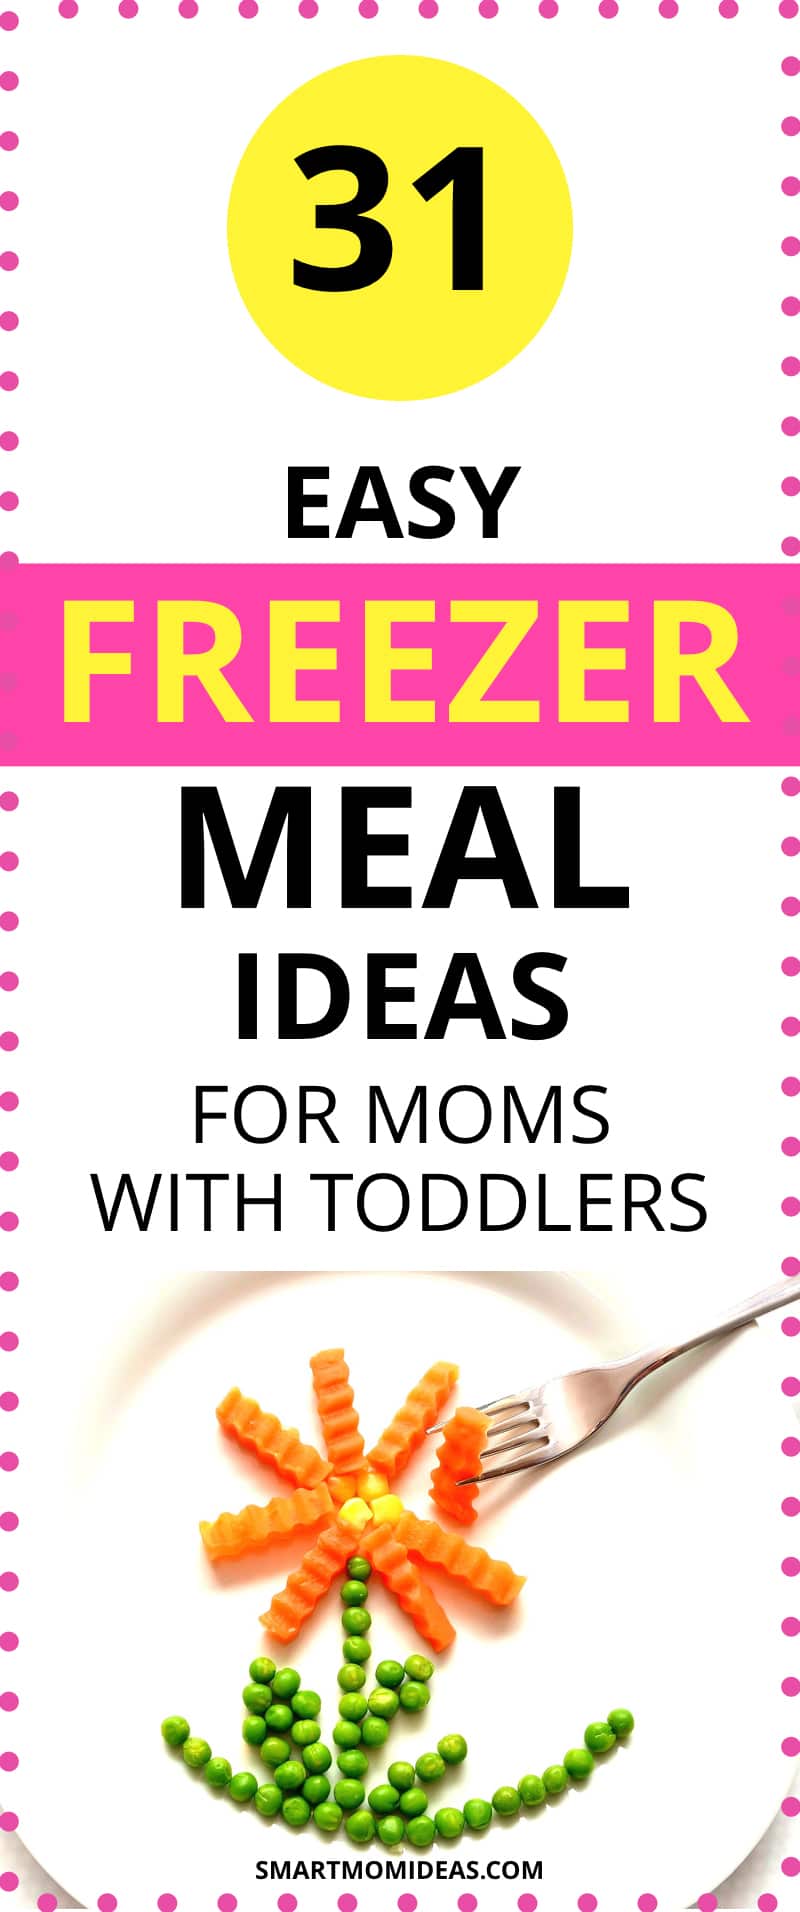 31 Stupidly Easy Make Ahead Freezer Meals for Moms With Toddlers ...